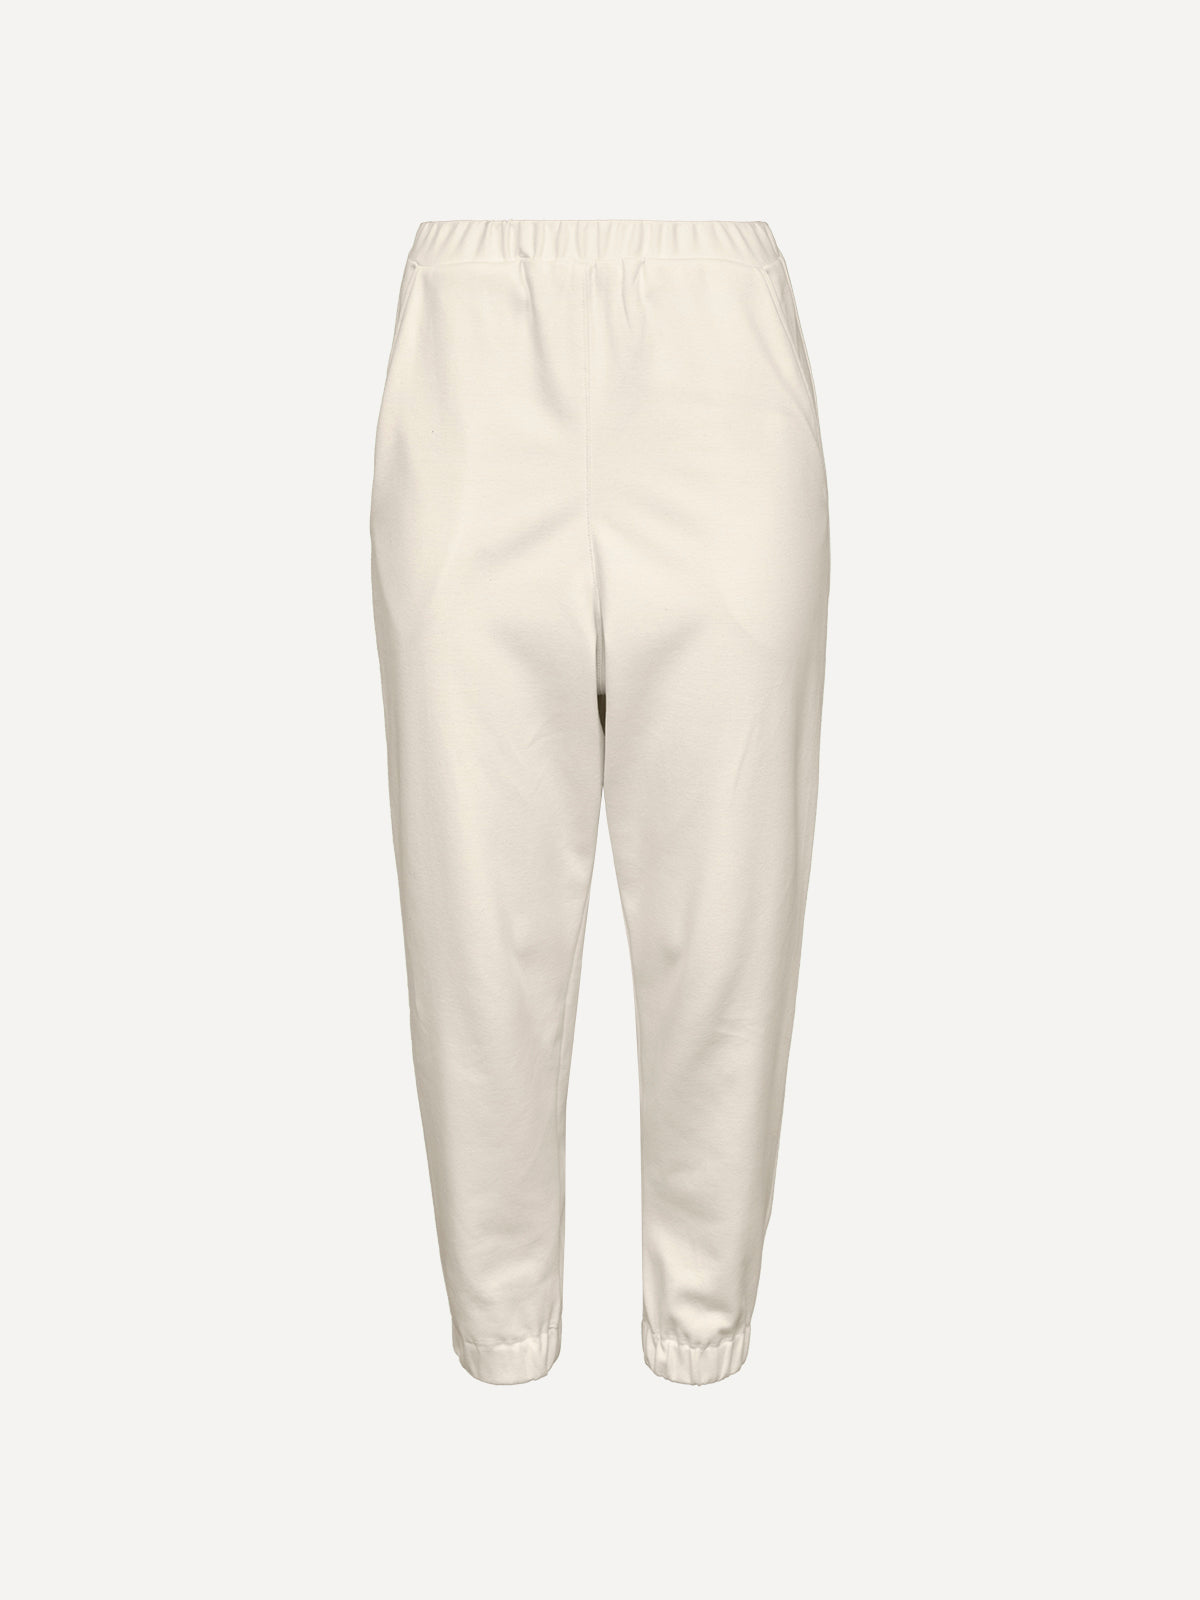 Women's trousers made of natural organic cotton